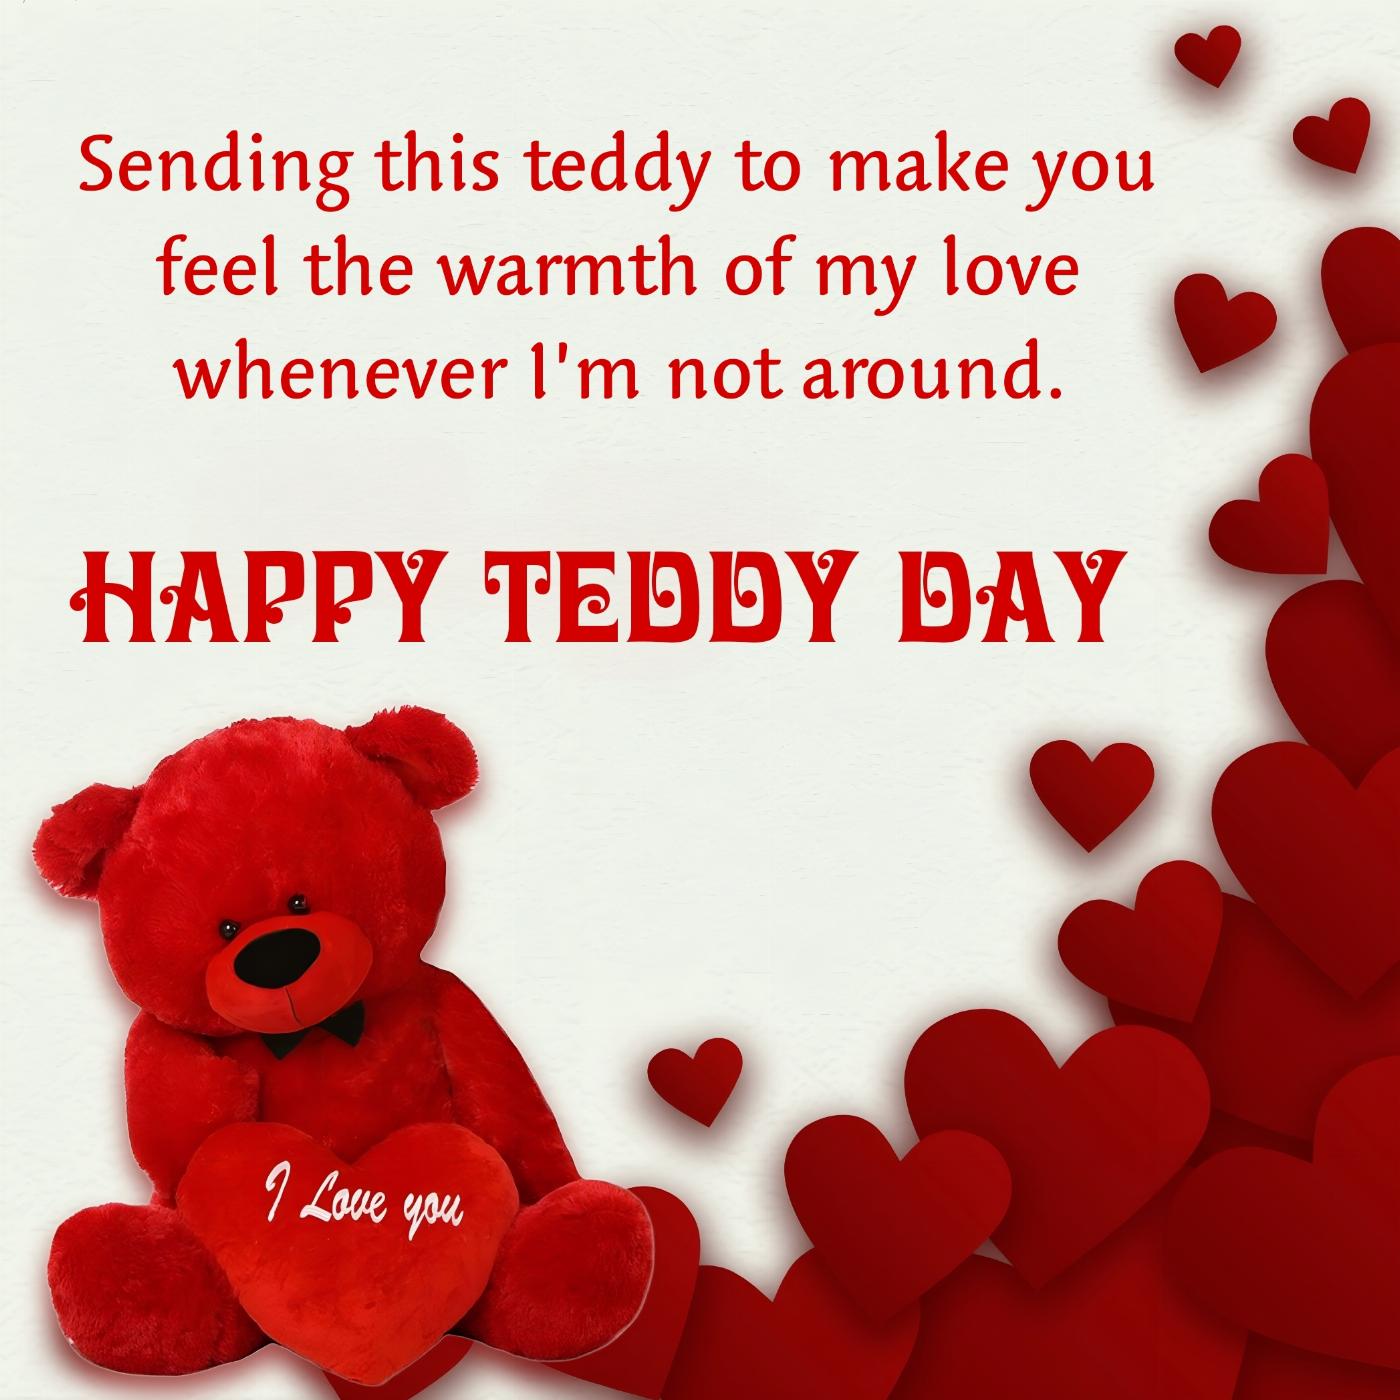 Sending this teddy to make you feel the warmth of my love